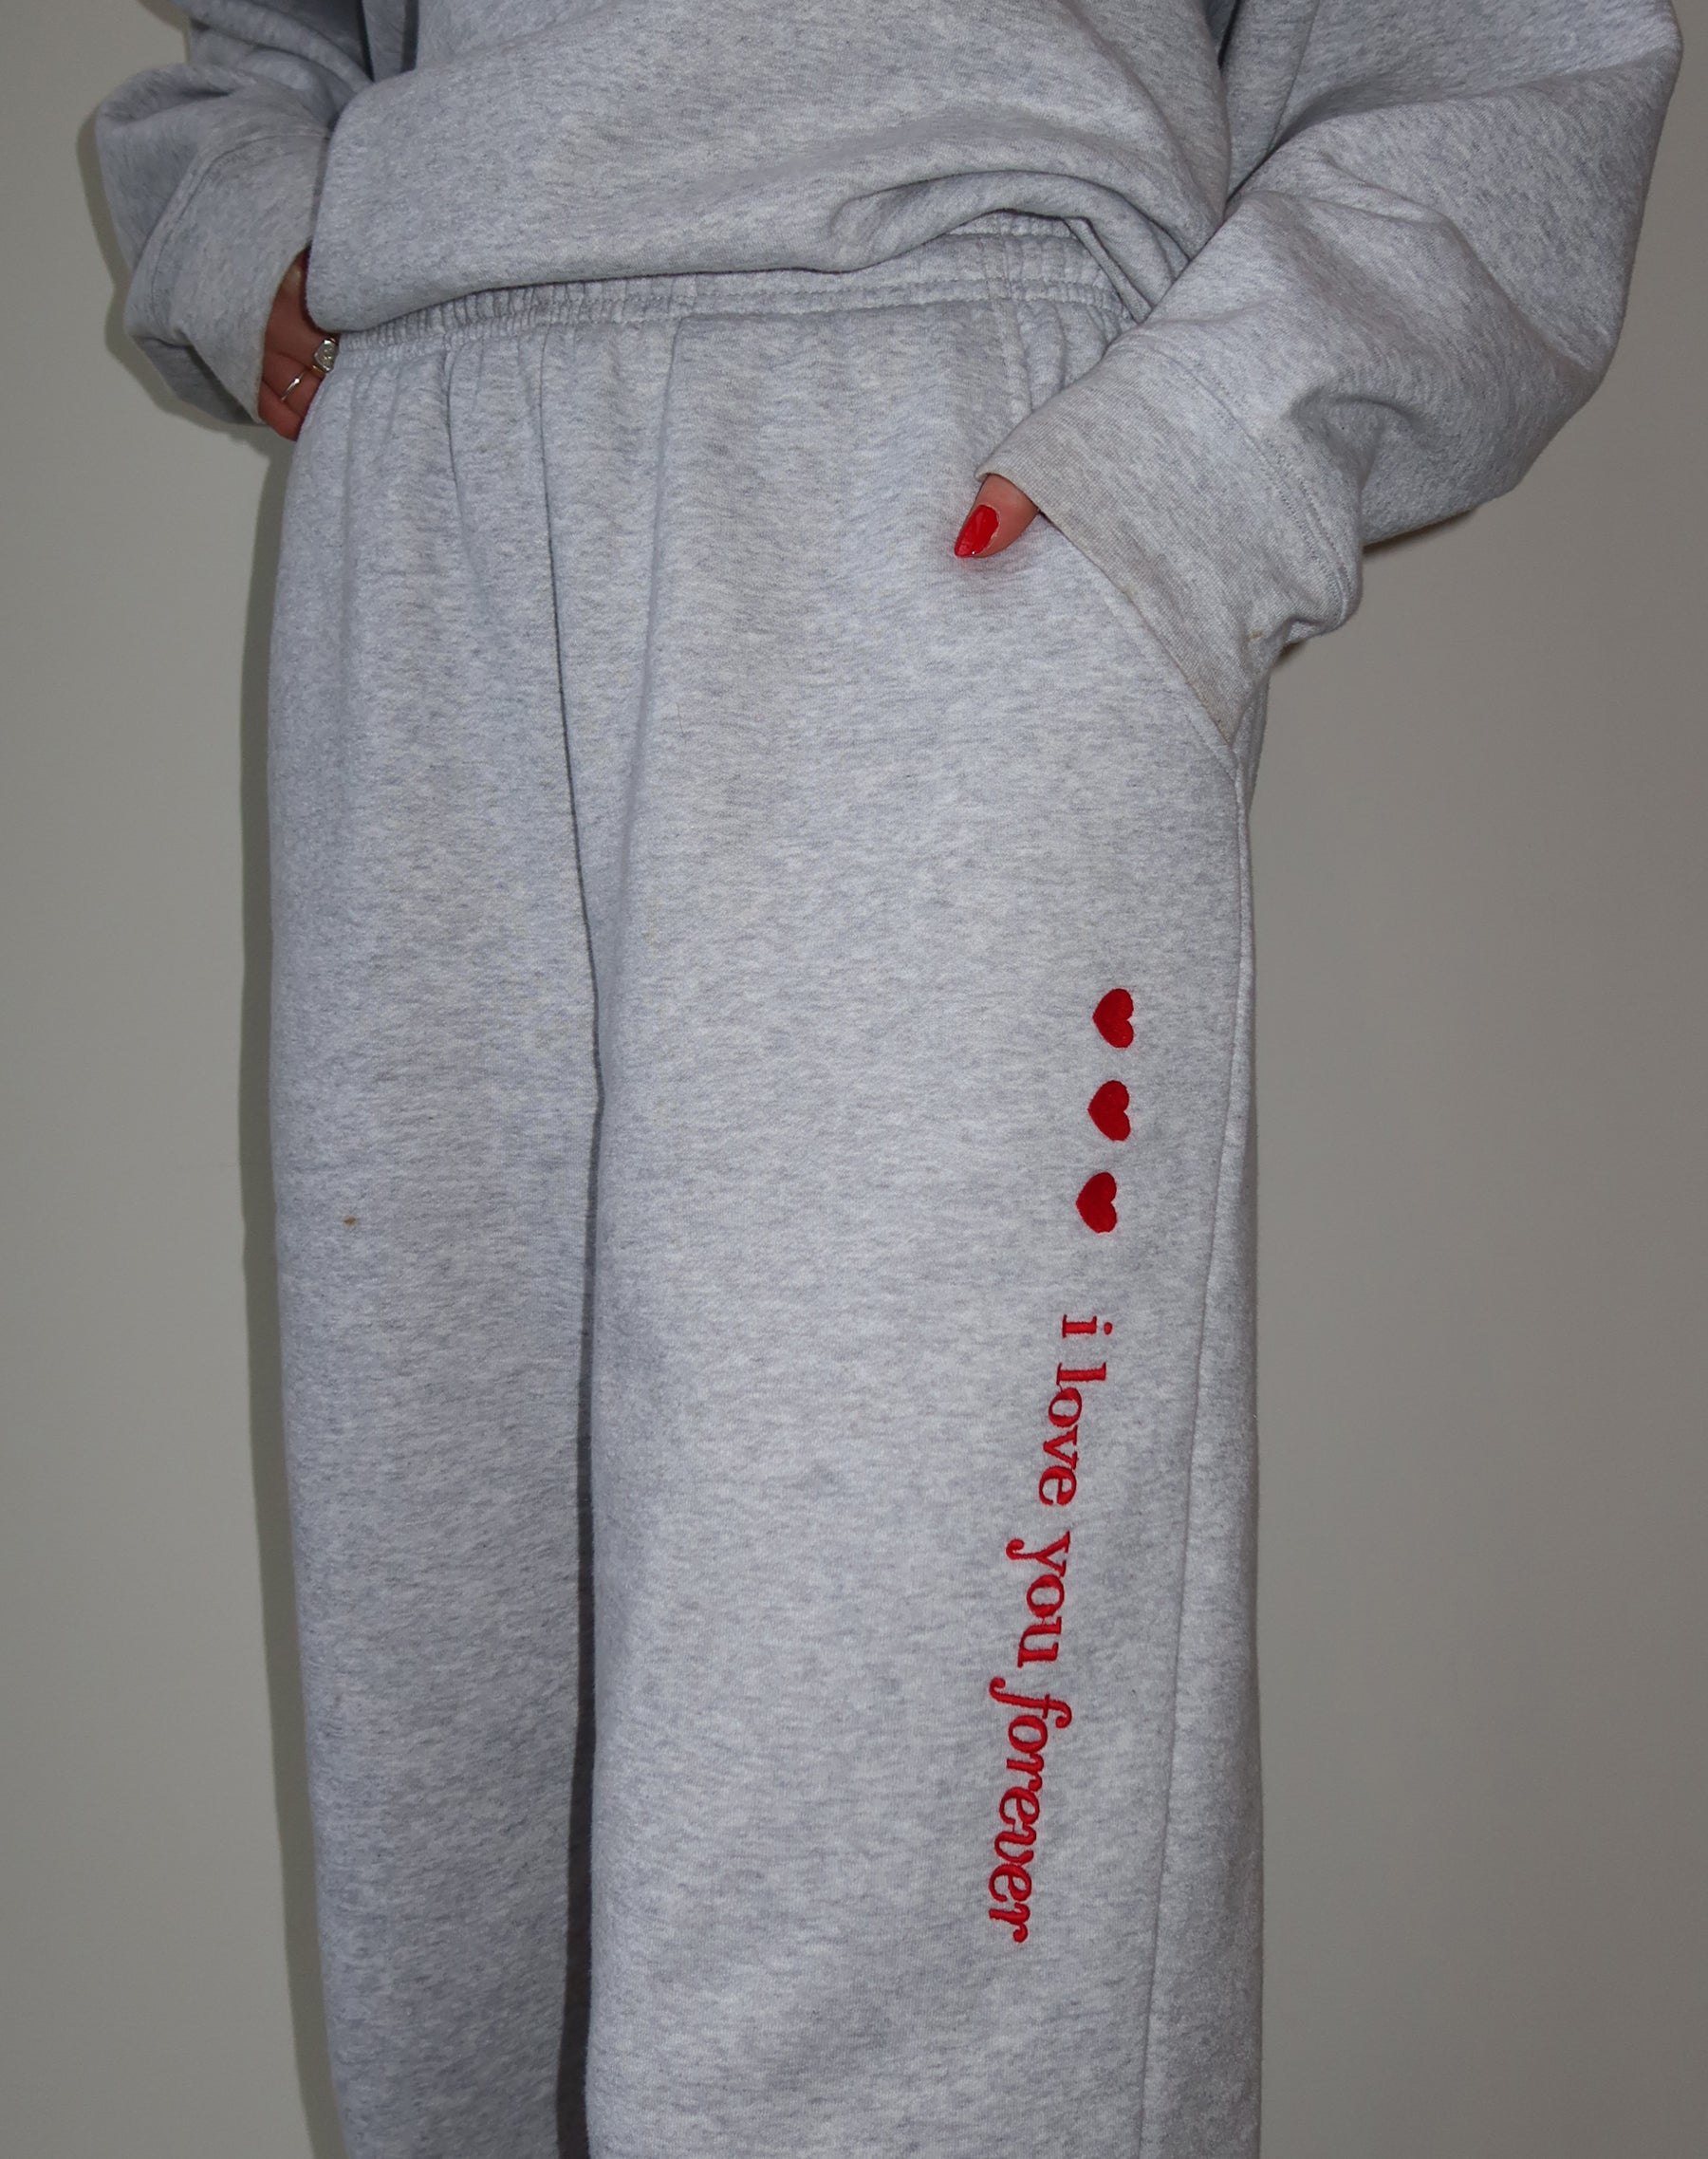 The "I LOVE YOU FOREVER" Oversized Joggers | Pebble Grey with Red